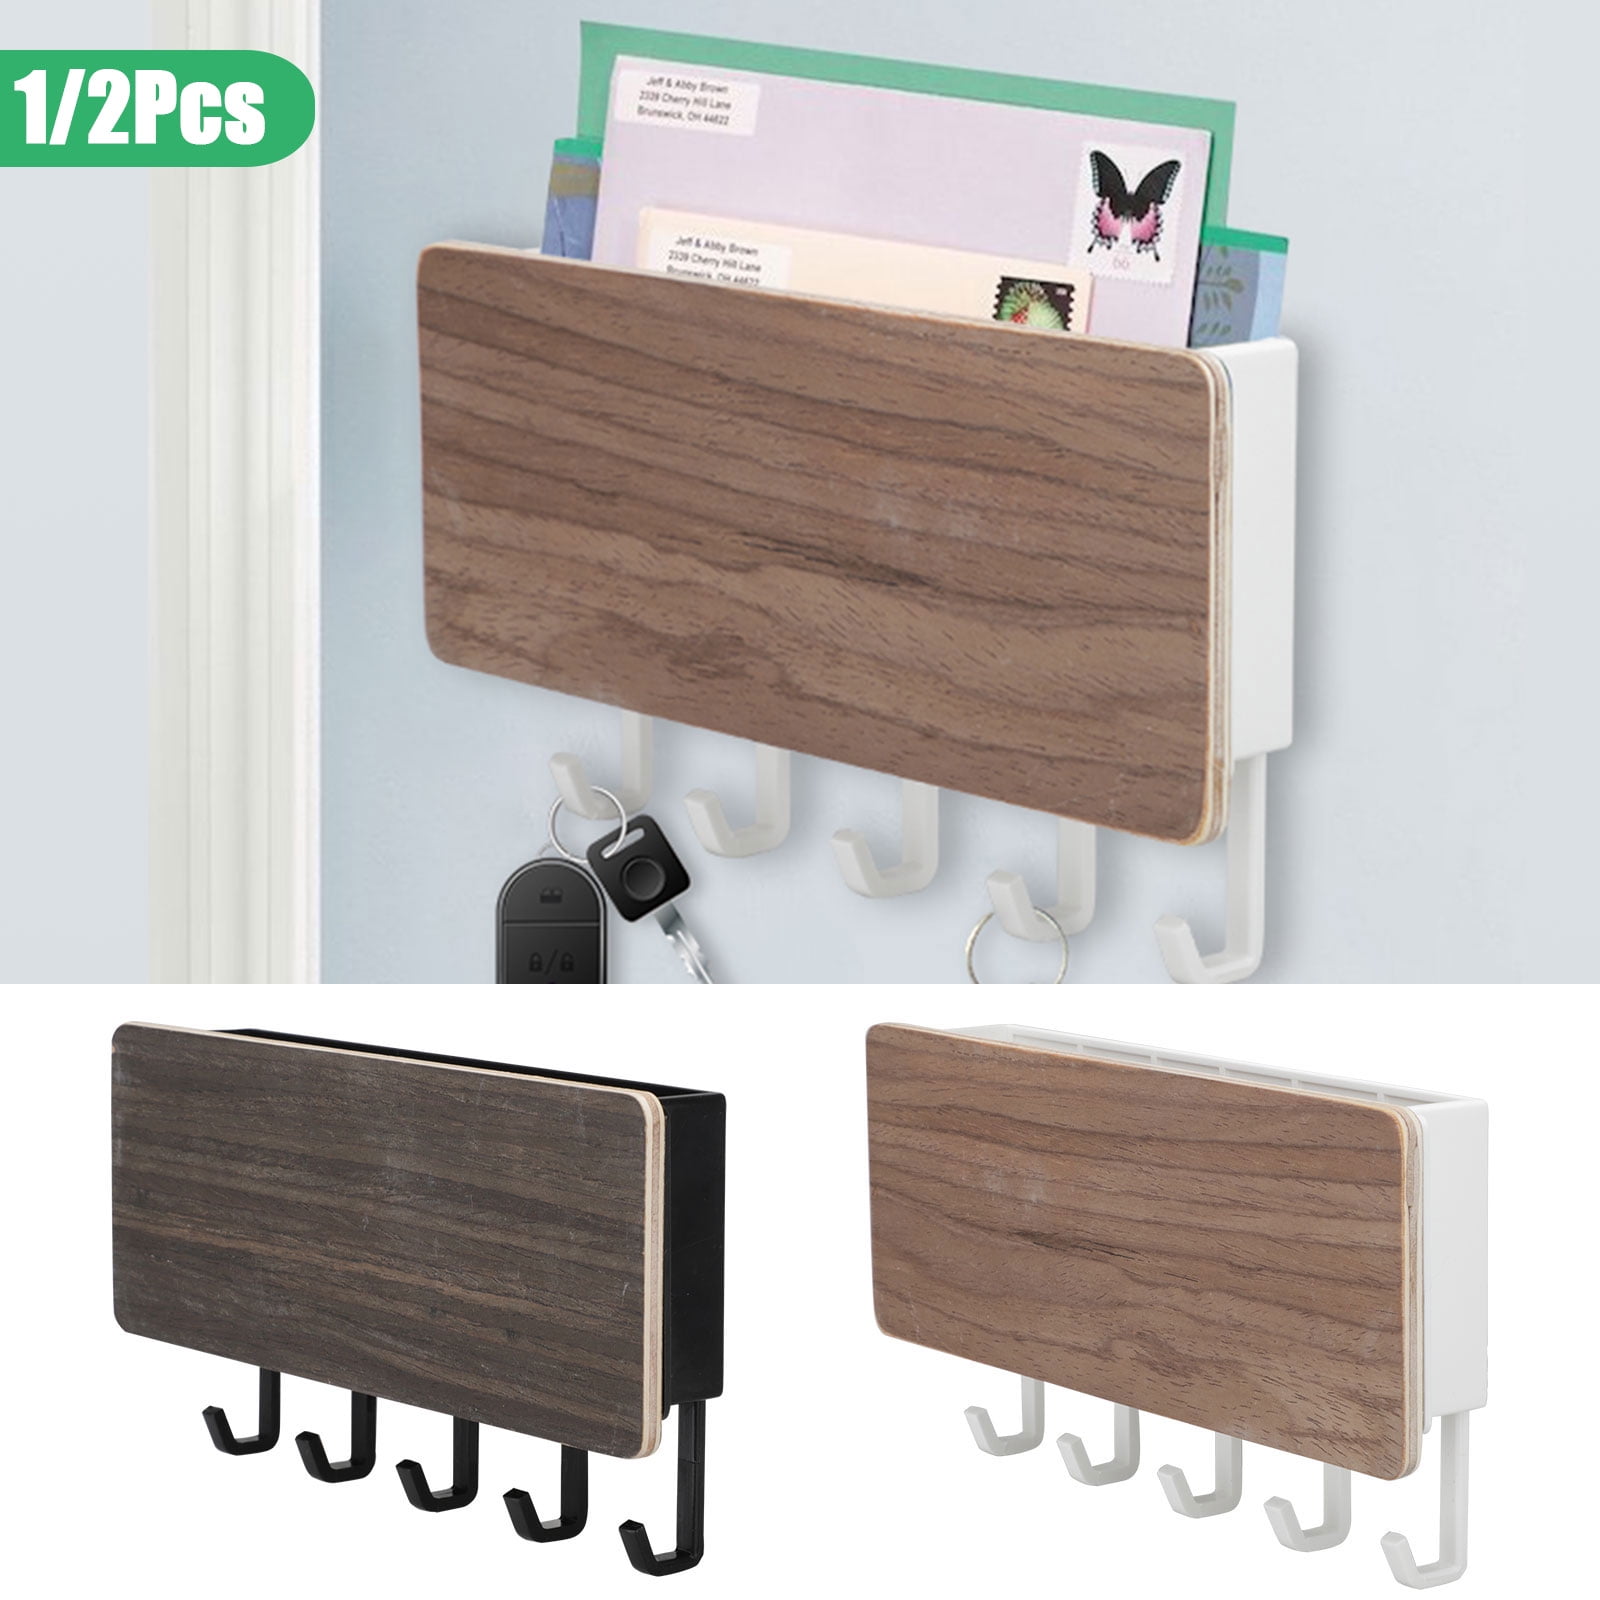 Rustic 2-Slot Mail Sorter Organizer for Wall with Chalkboard Surface & 3 Double Key Hooks Wall Décor for Entryway Made of Paulownia Wood Dark Brown Wooden Wall Mount Mail Holder Organizer